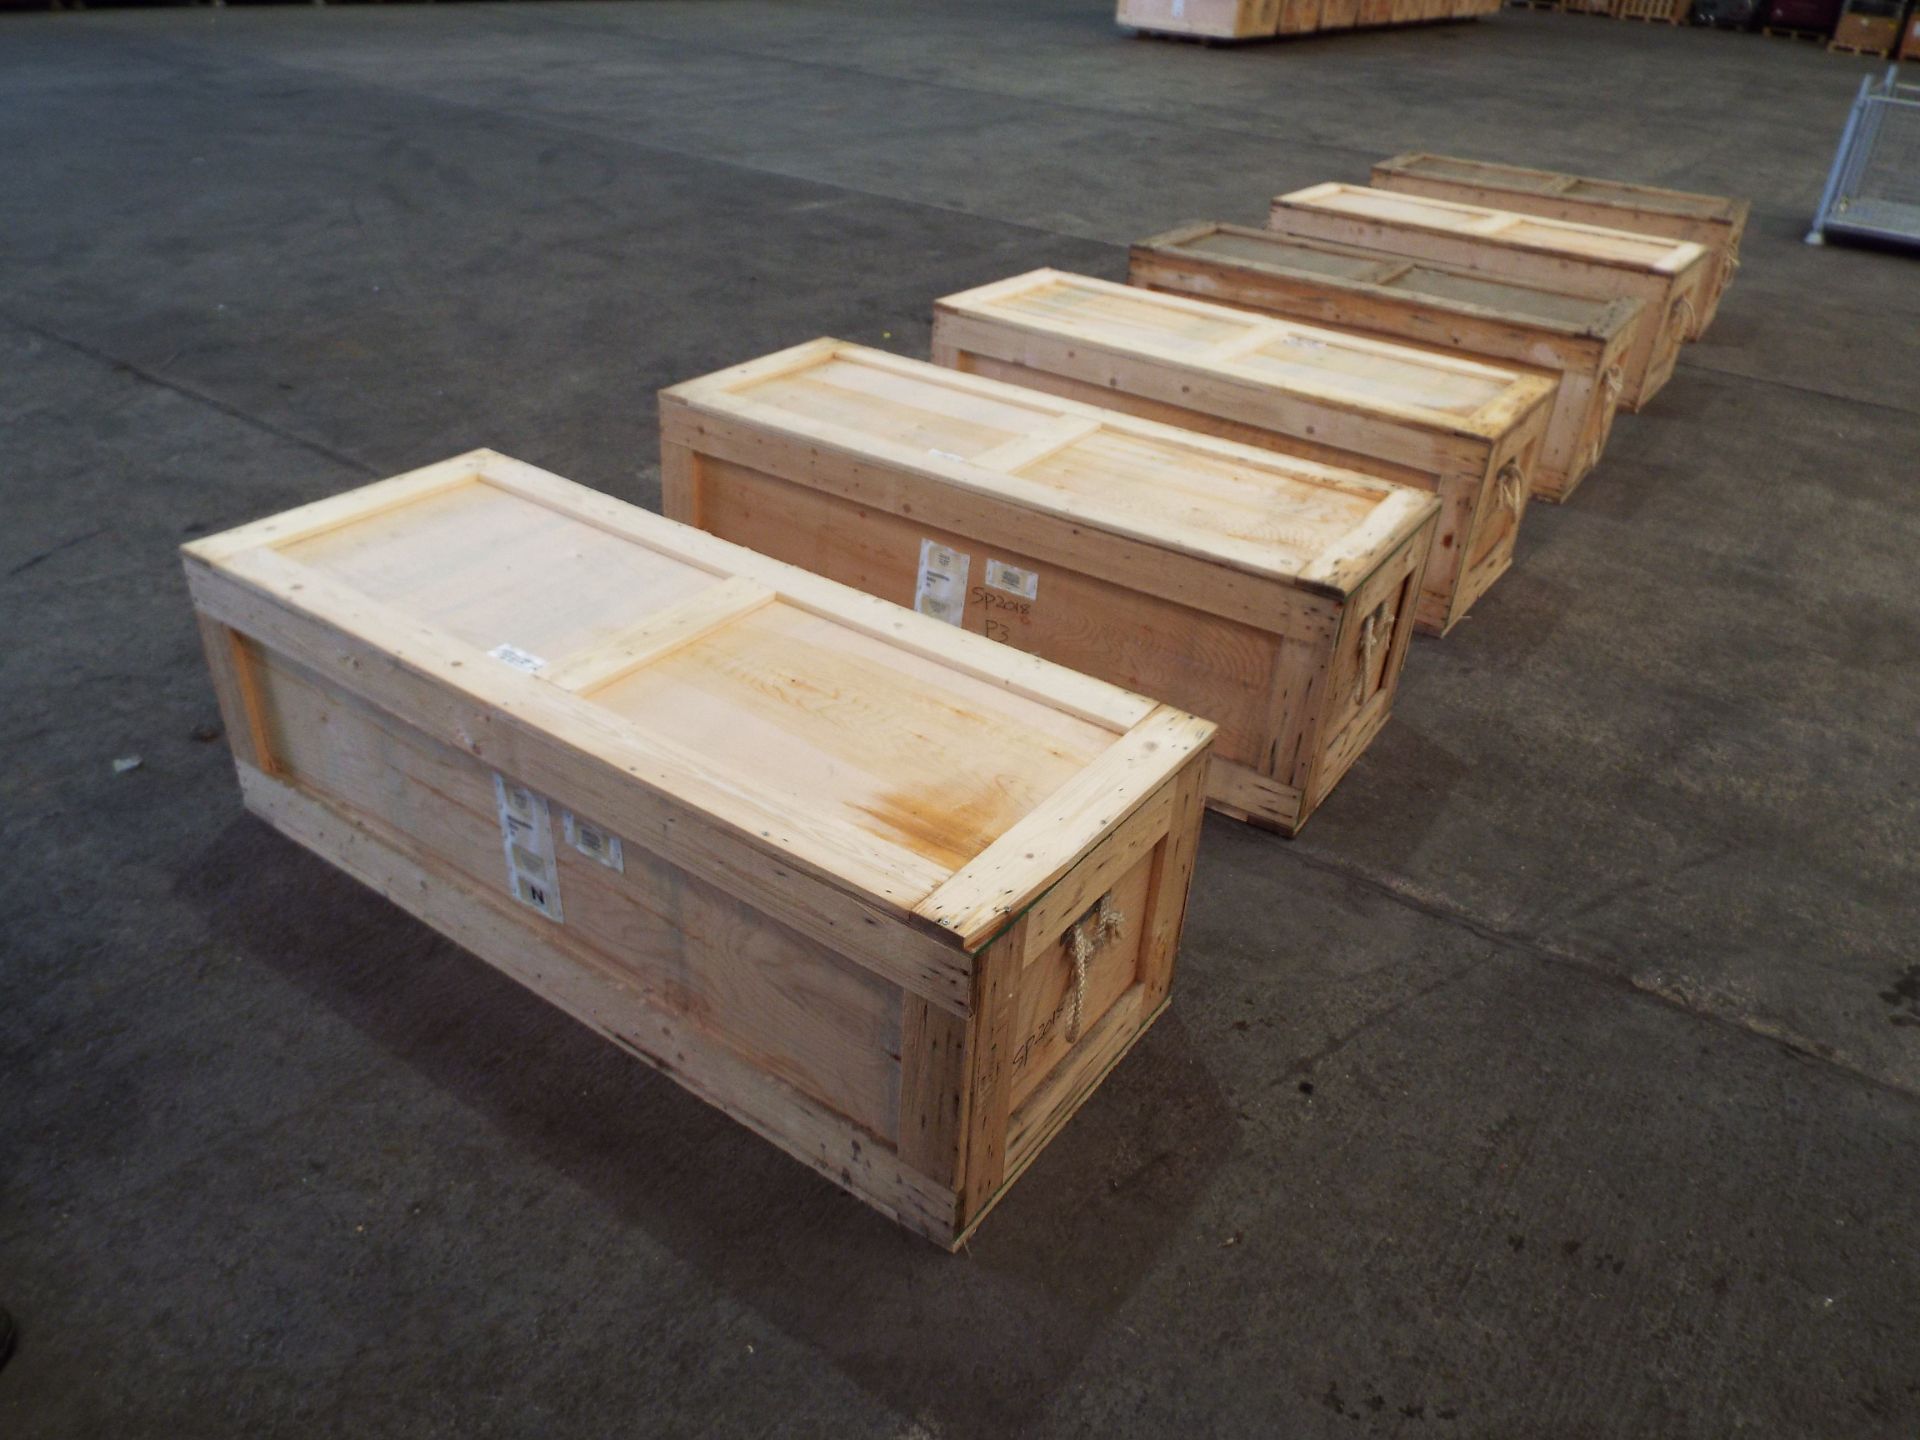 6 x Heavy Duty Packing/Shipping Crates